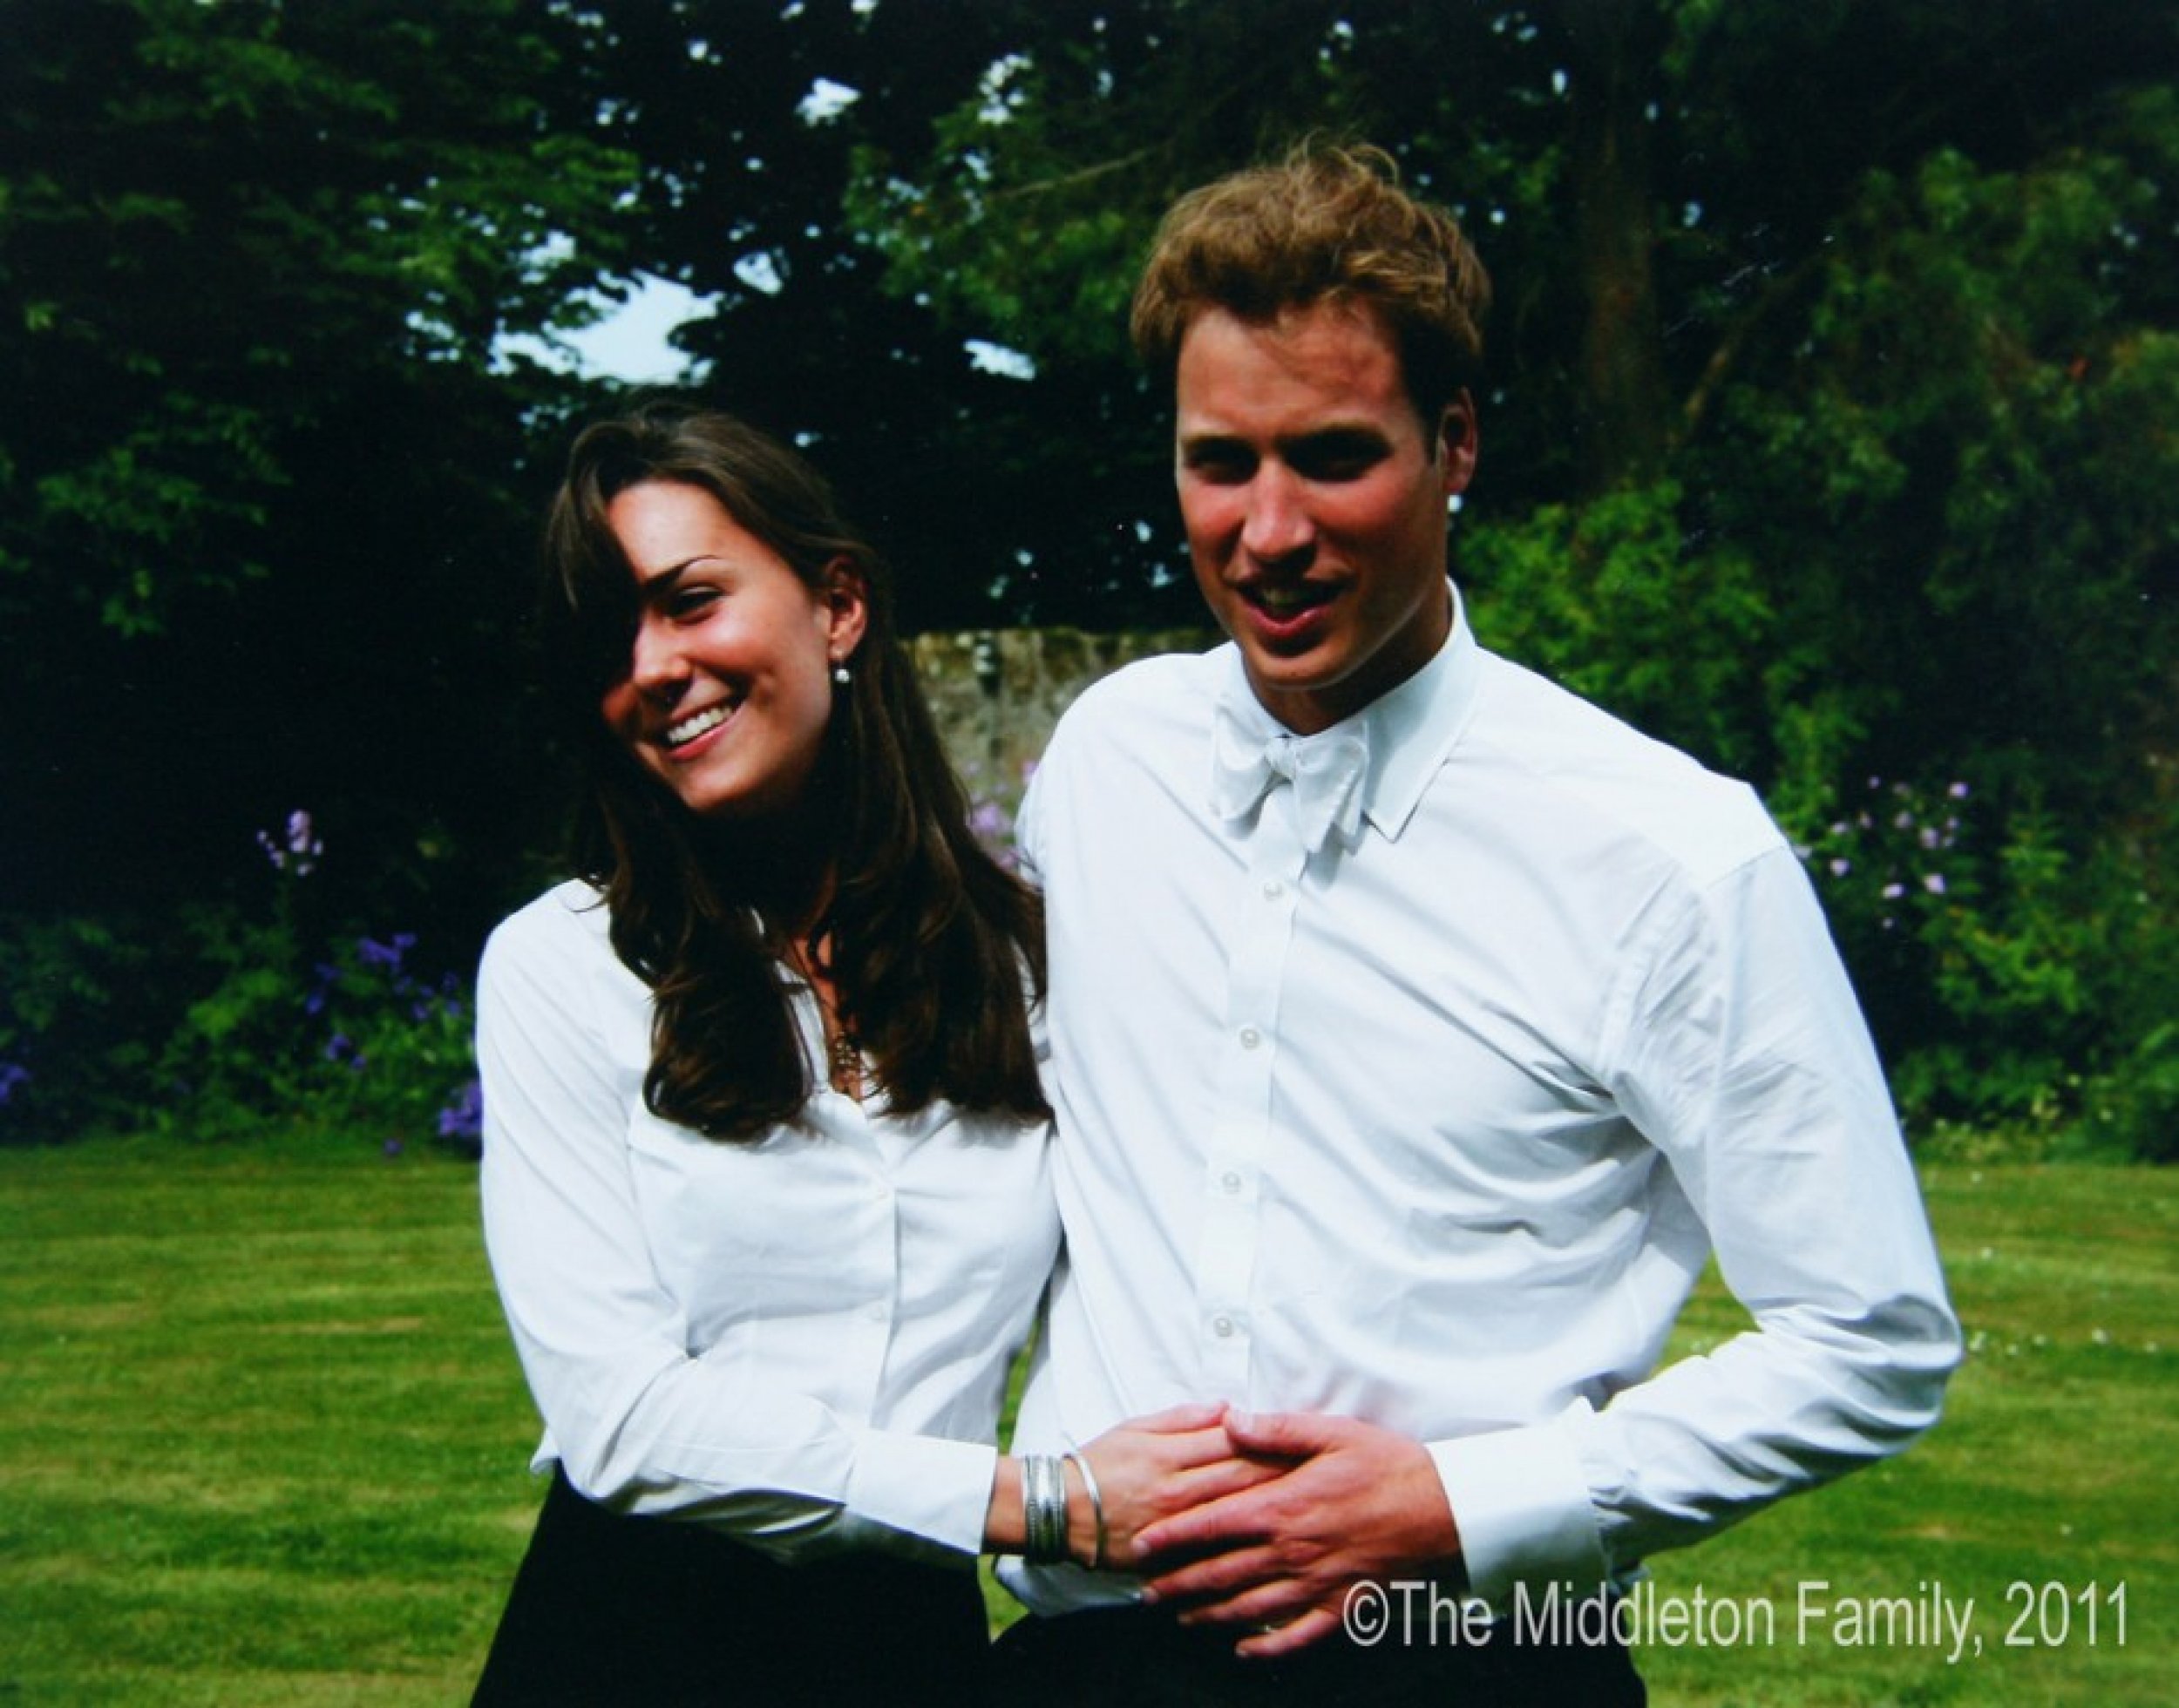 Kate Catherine Middleton and Prince William on their graduation day, St. Andrew University, June 2005.